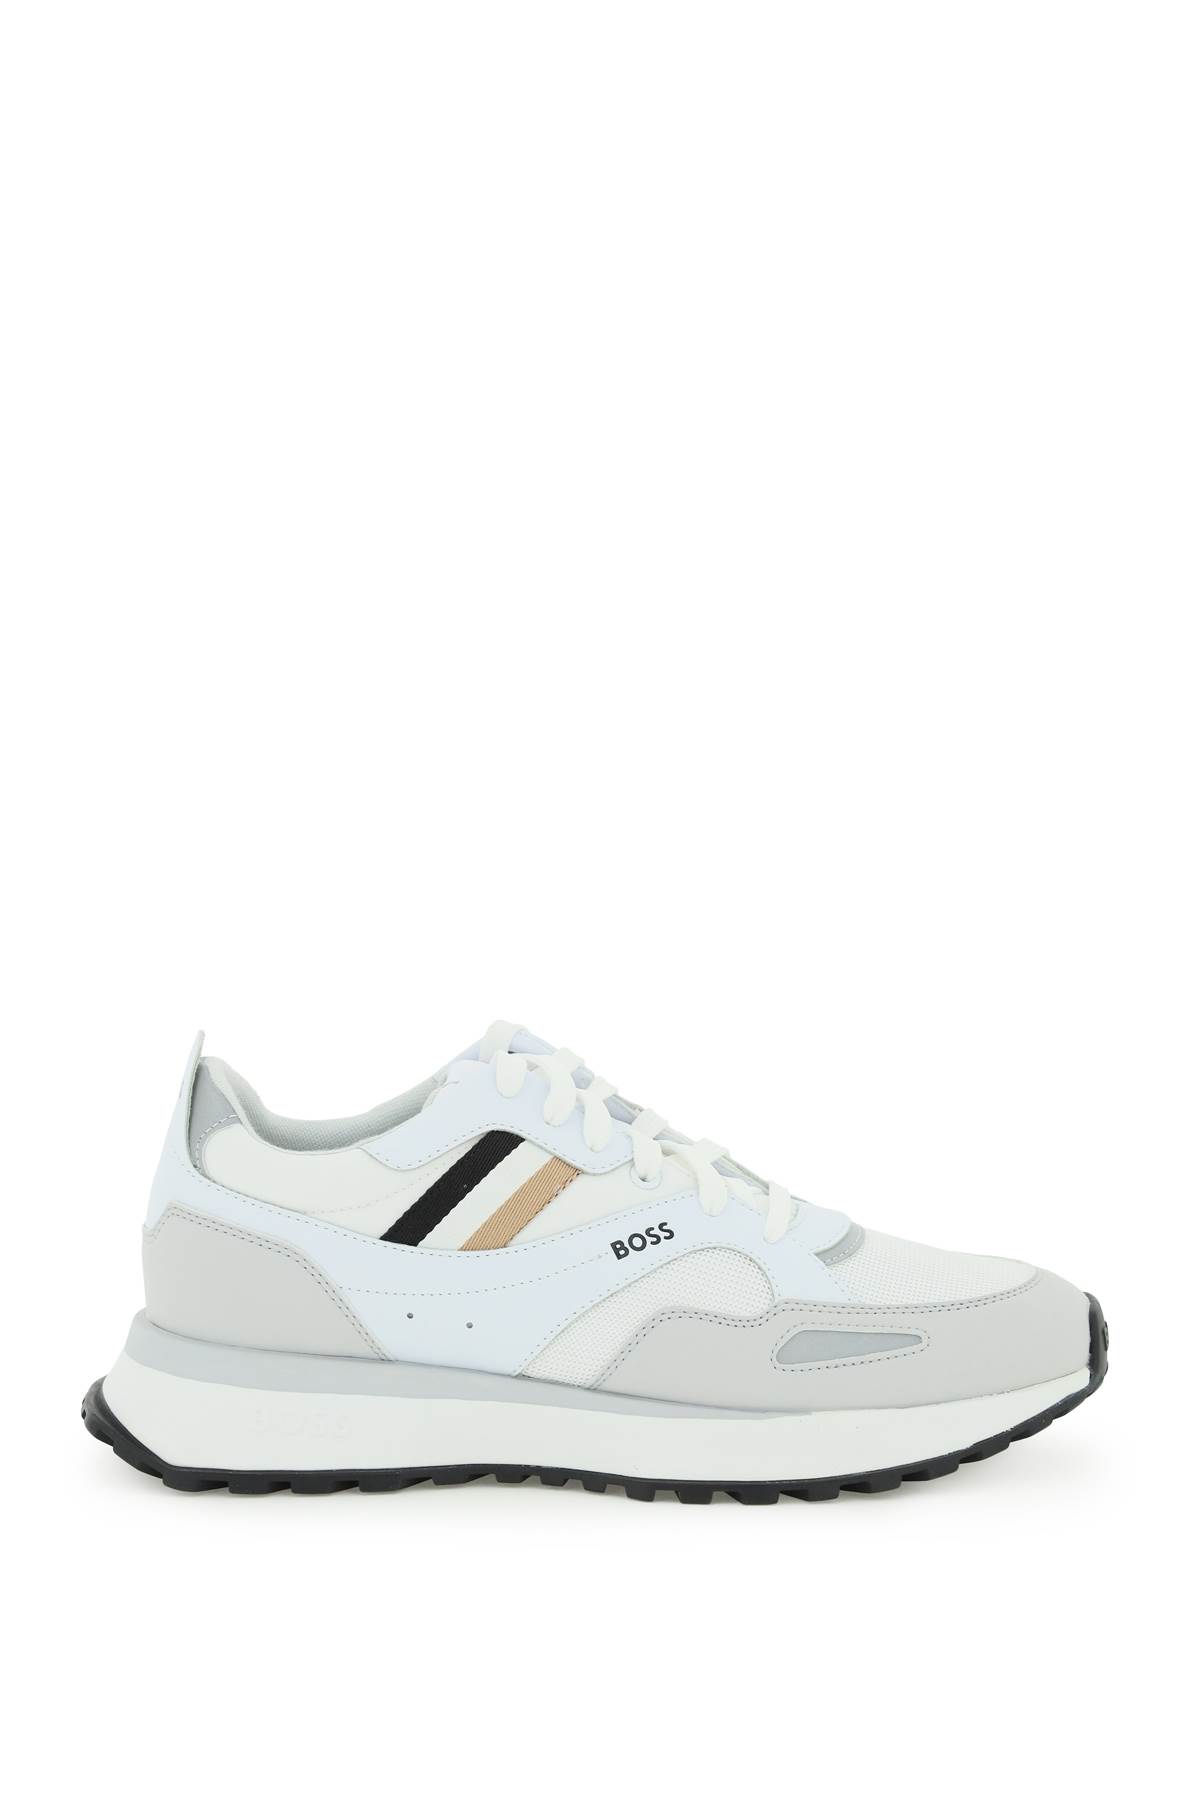 Hugo Boss Boss X Russell Athletic - Baltimore Leather Low-top